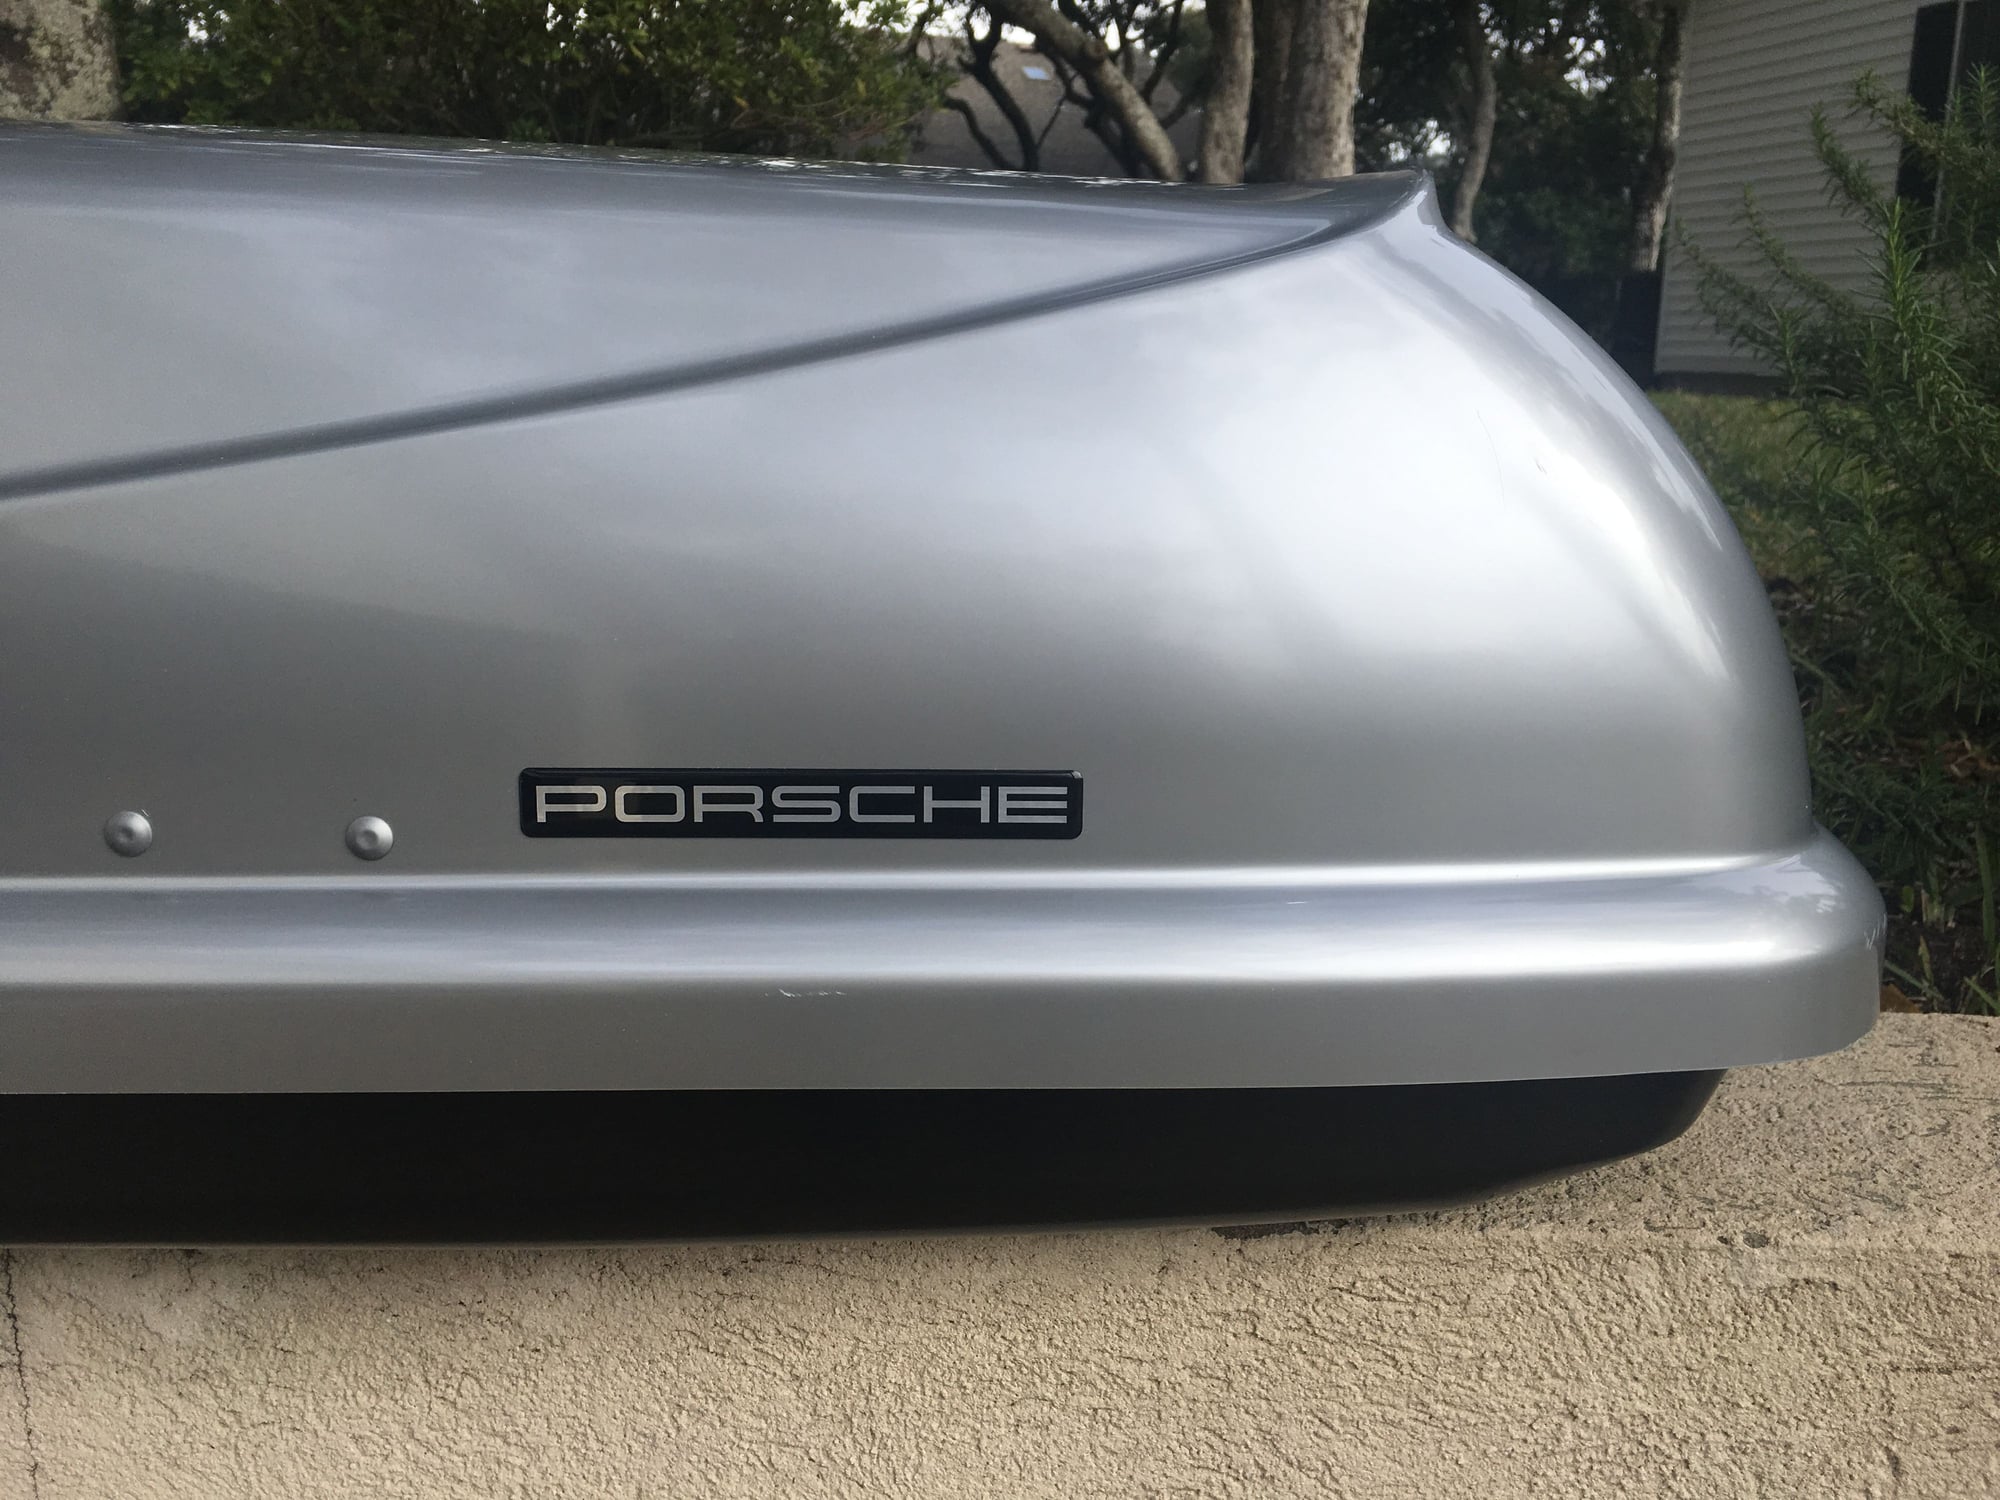 Accessories - FS: Roof Transport System & Roof Box (Narrow) Silver $1000/both - Used - 1999 to 2012 Porsche 911 - Amelia Island, FL 32034, United States